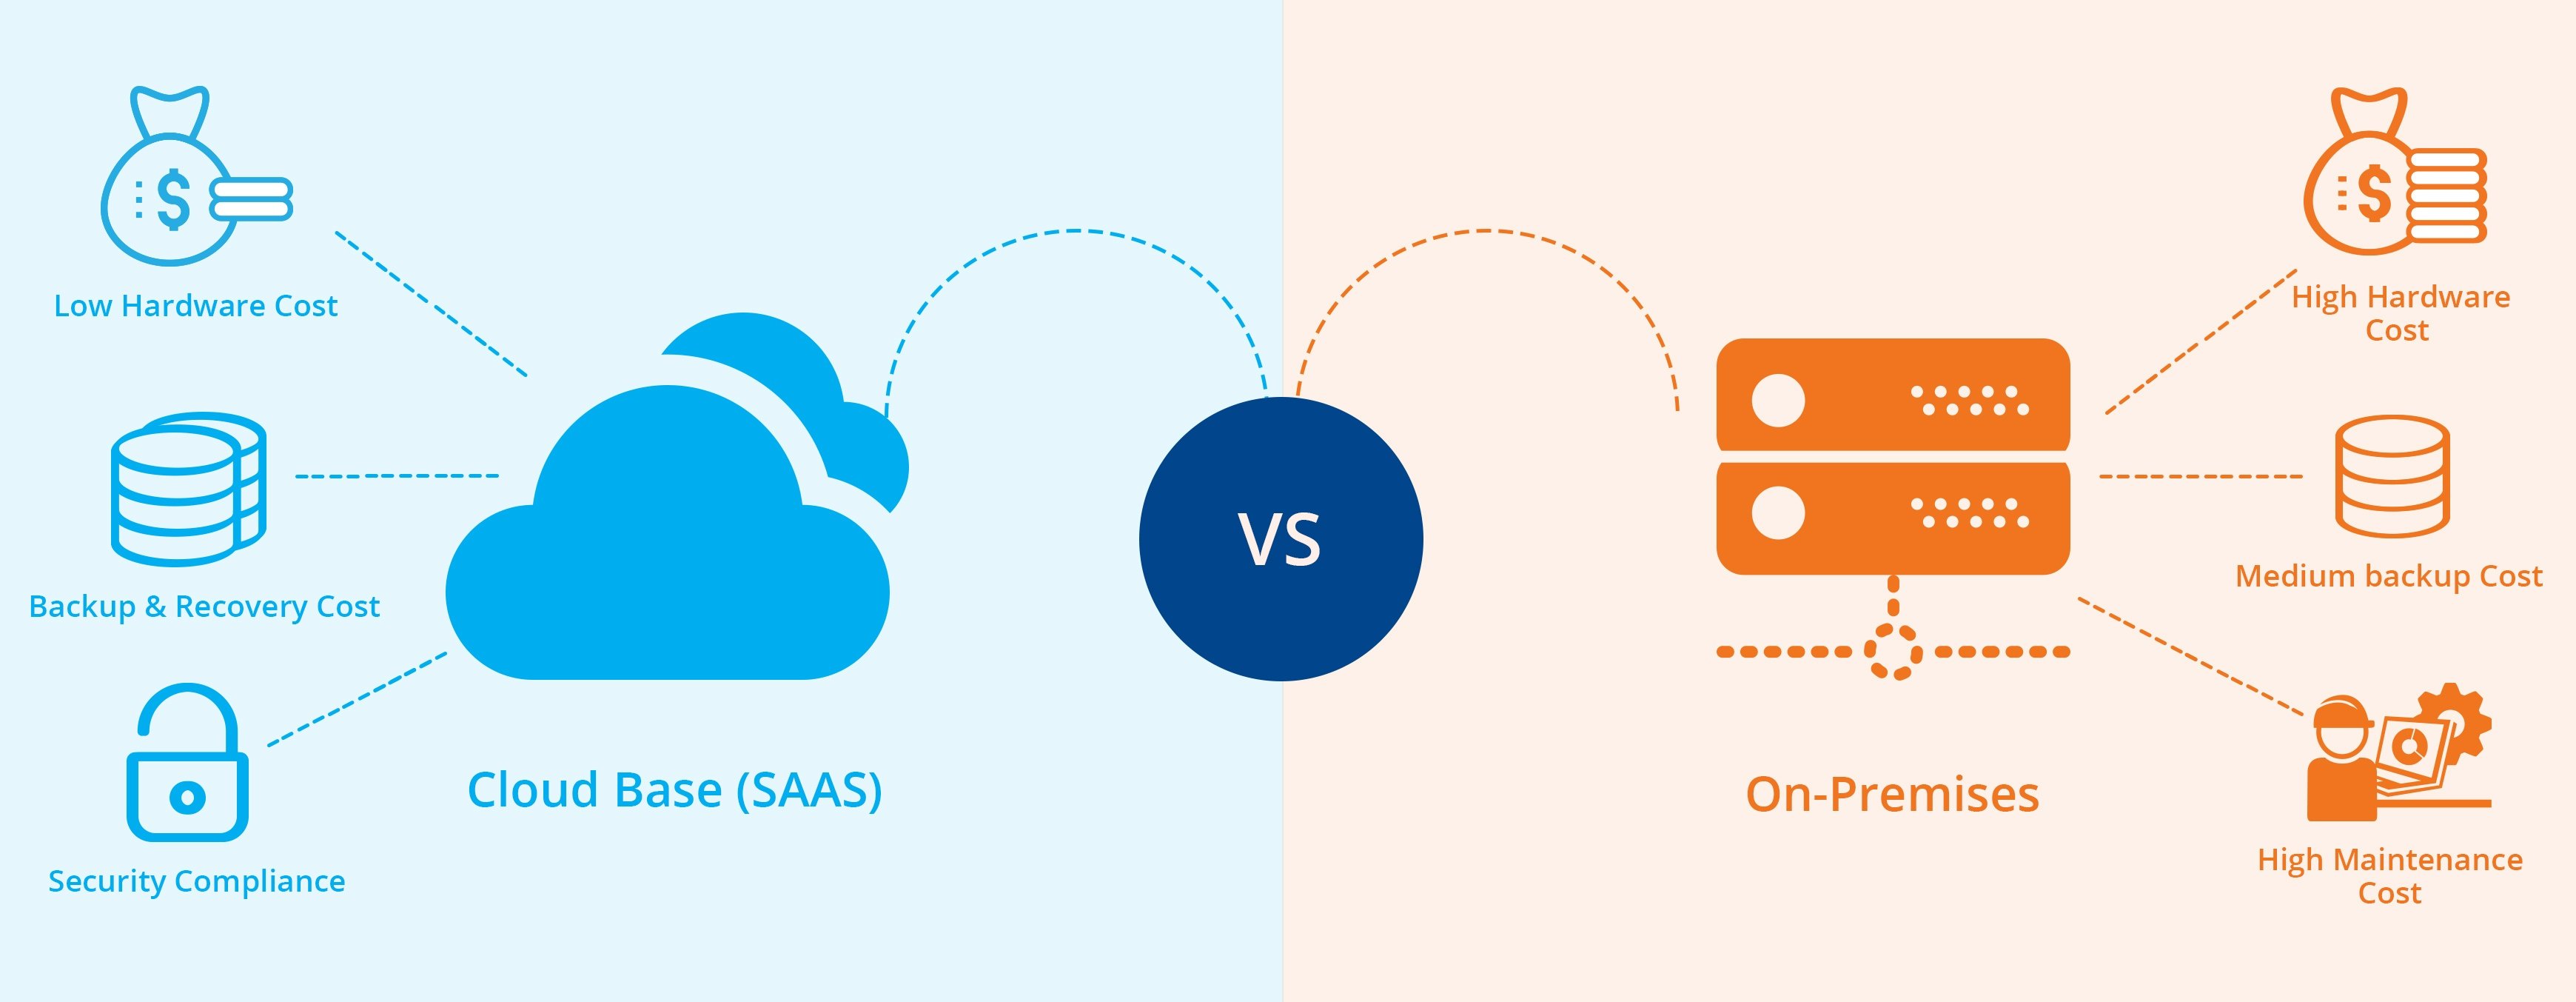 Video Streaming on Cloud vs. On-Premises | Cost and Benefits